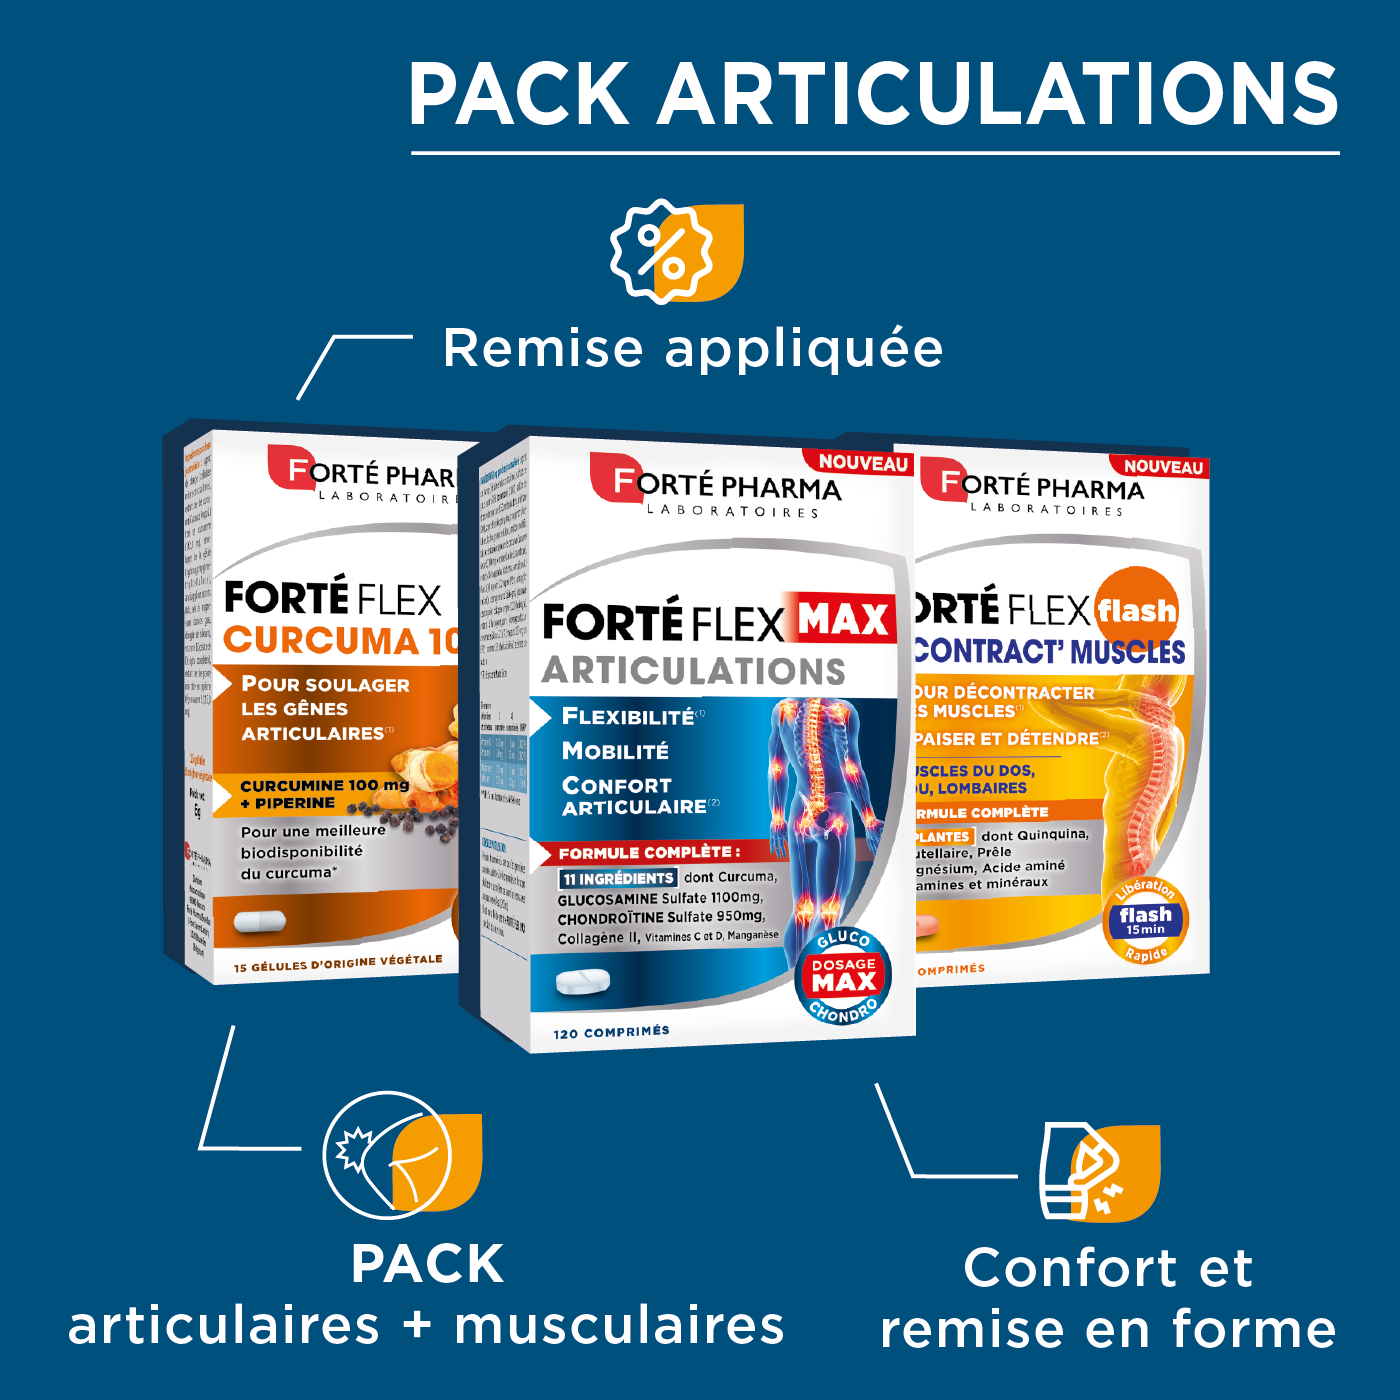 Pack articulations confort articulaire musculaire bénéfices